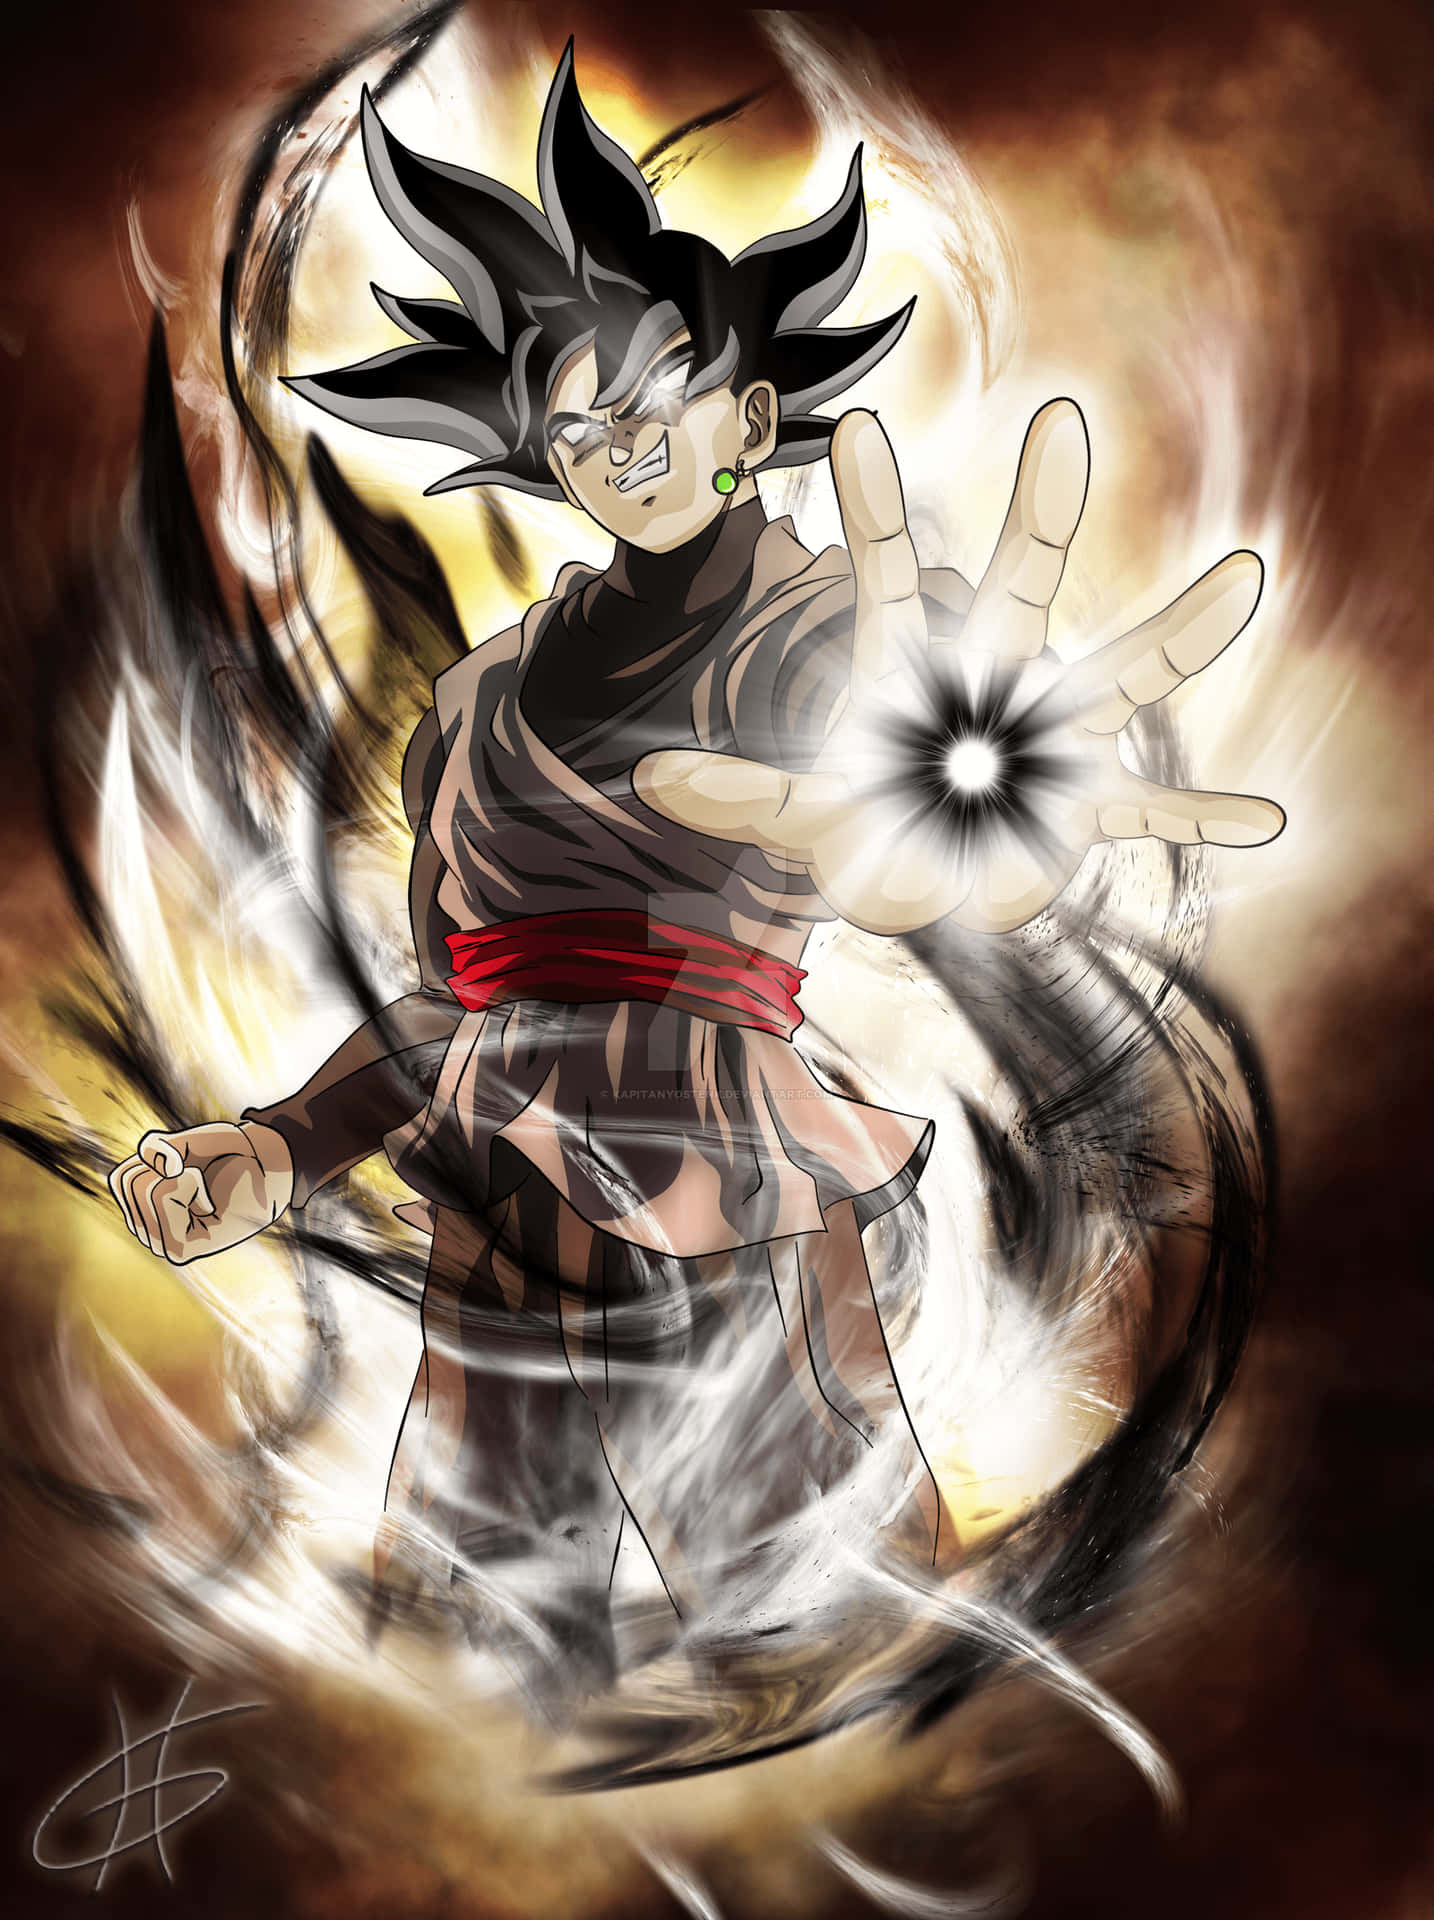 Goku Black Supreme conquers anything that stands in his way Wallpaper